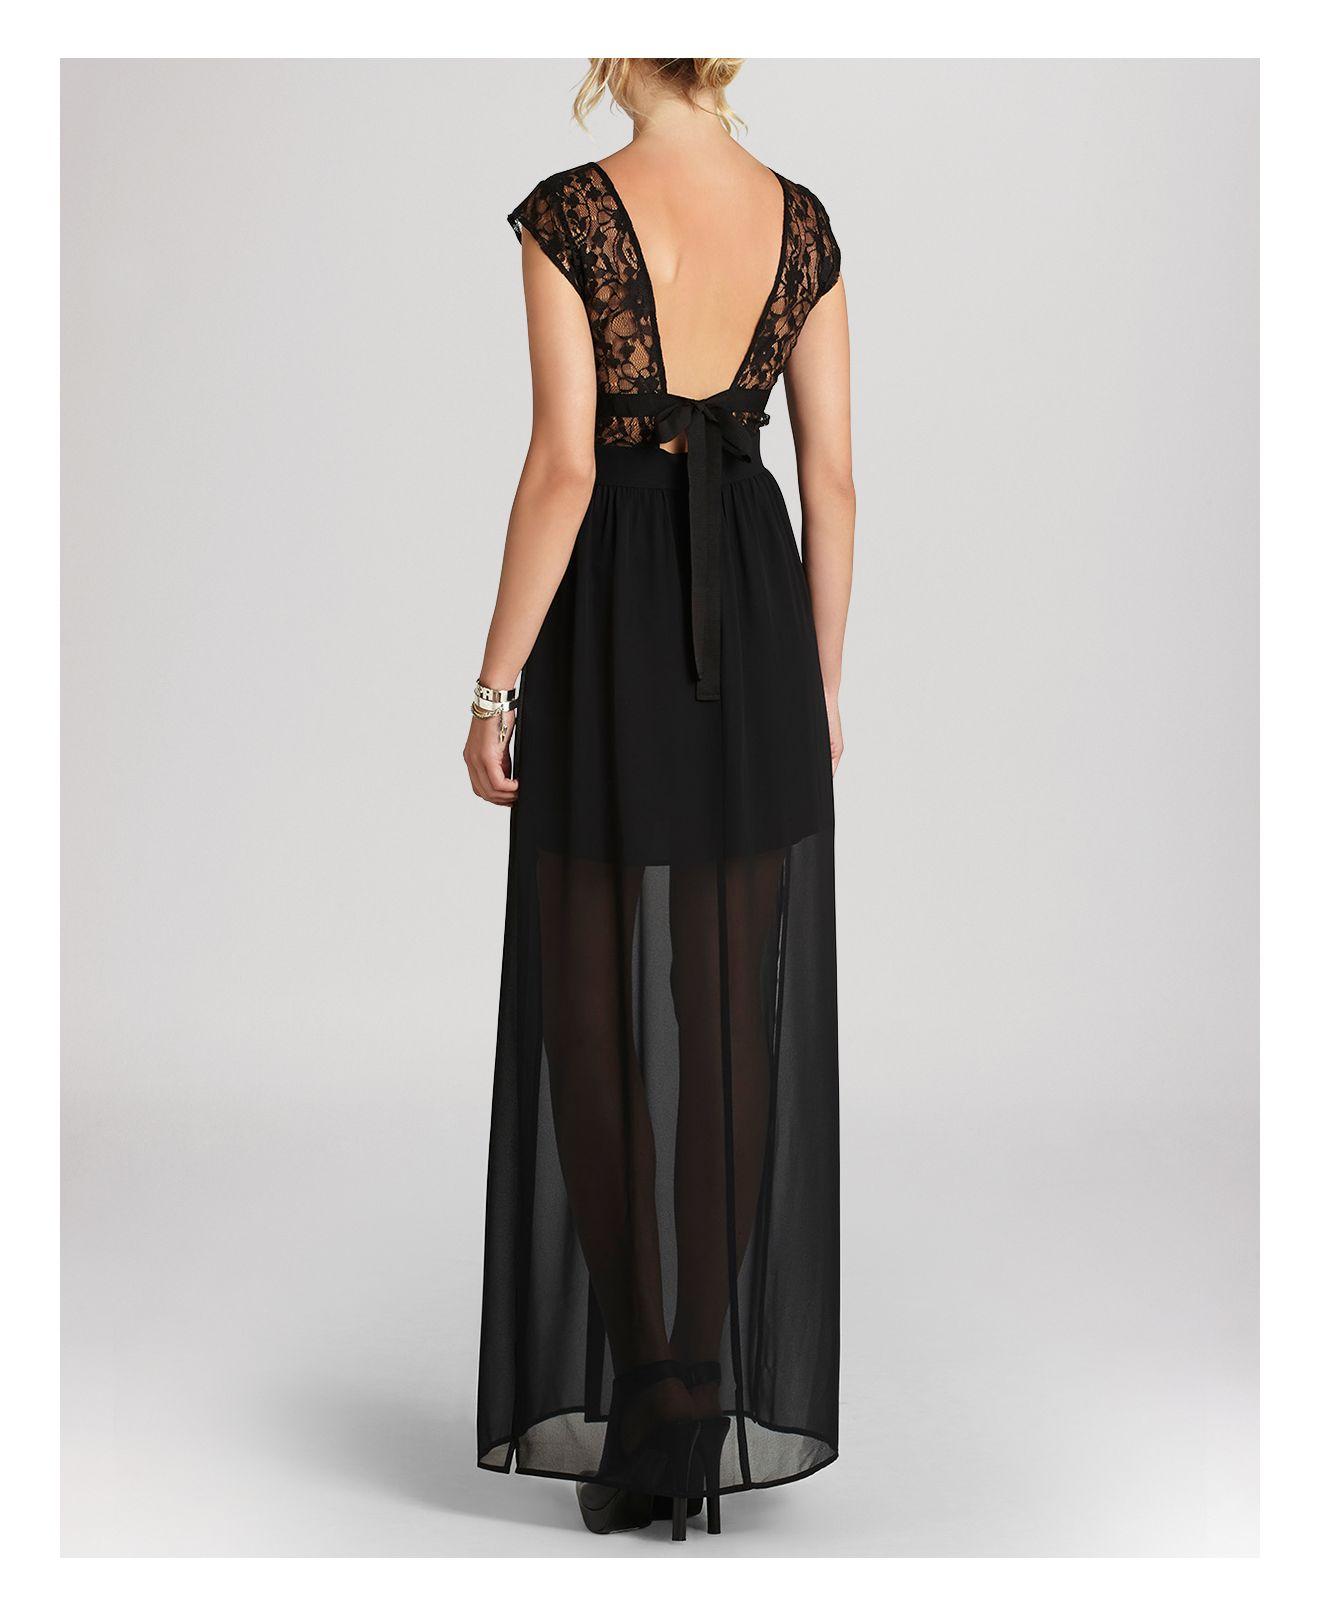 Lyst - Bcbgeneration Maxi Dress - Sheer Lace in Black